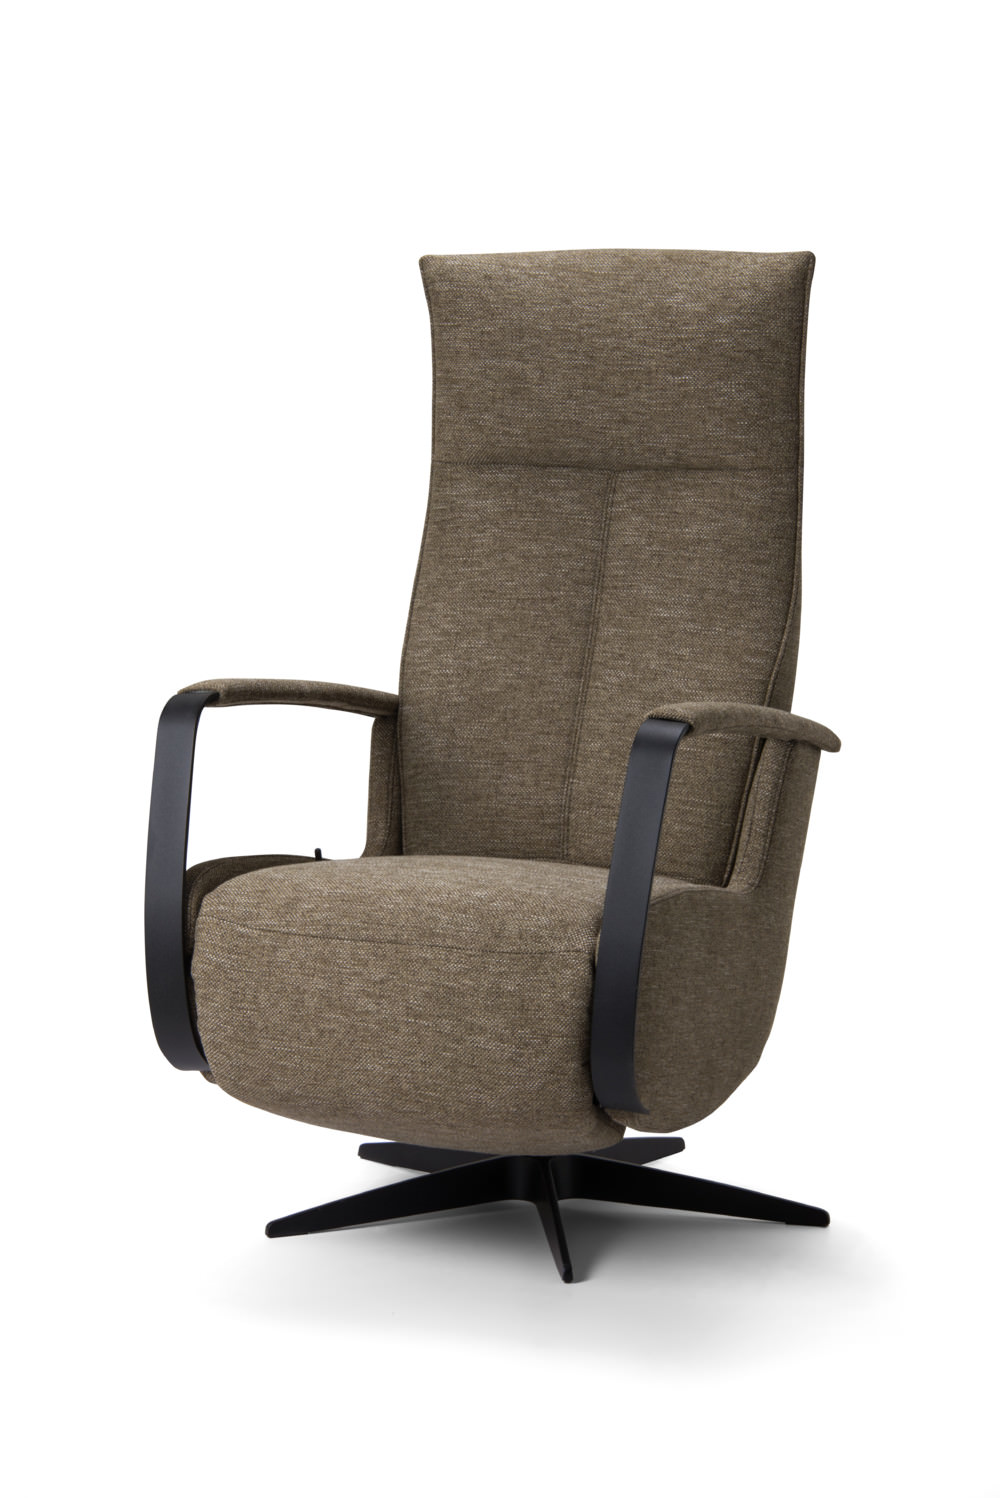 Relaxfauteuil F1-400 